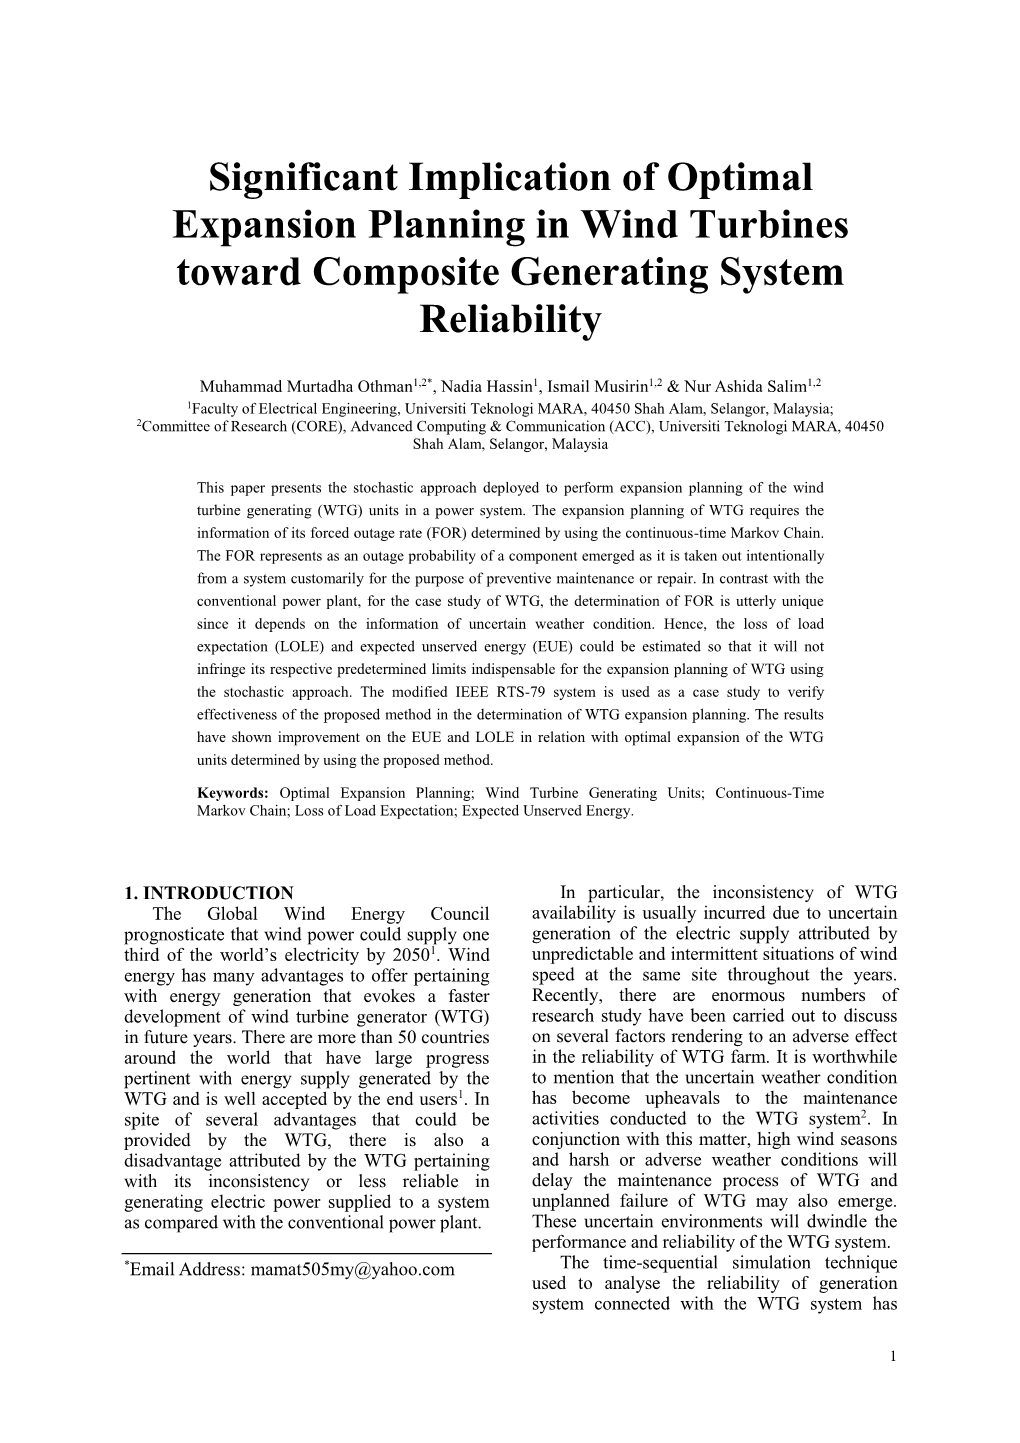 Significant Implication of Optimal Expansion Planning in Wind Turbines Toward Composite Generating System Reliability